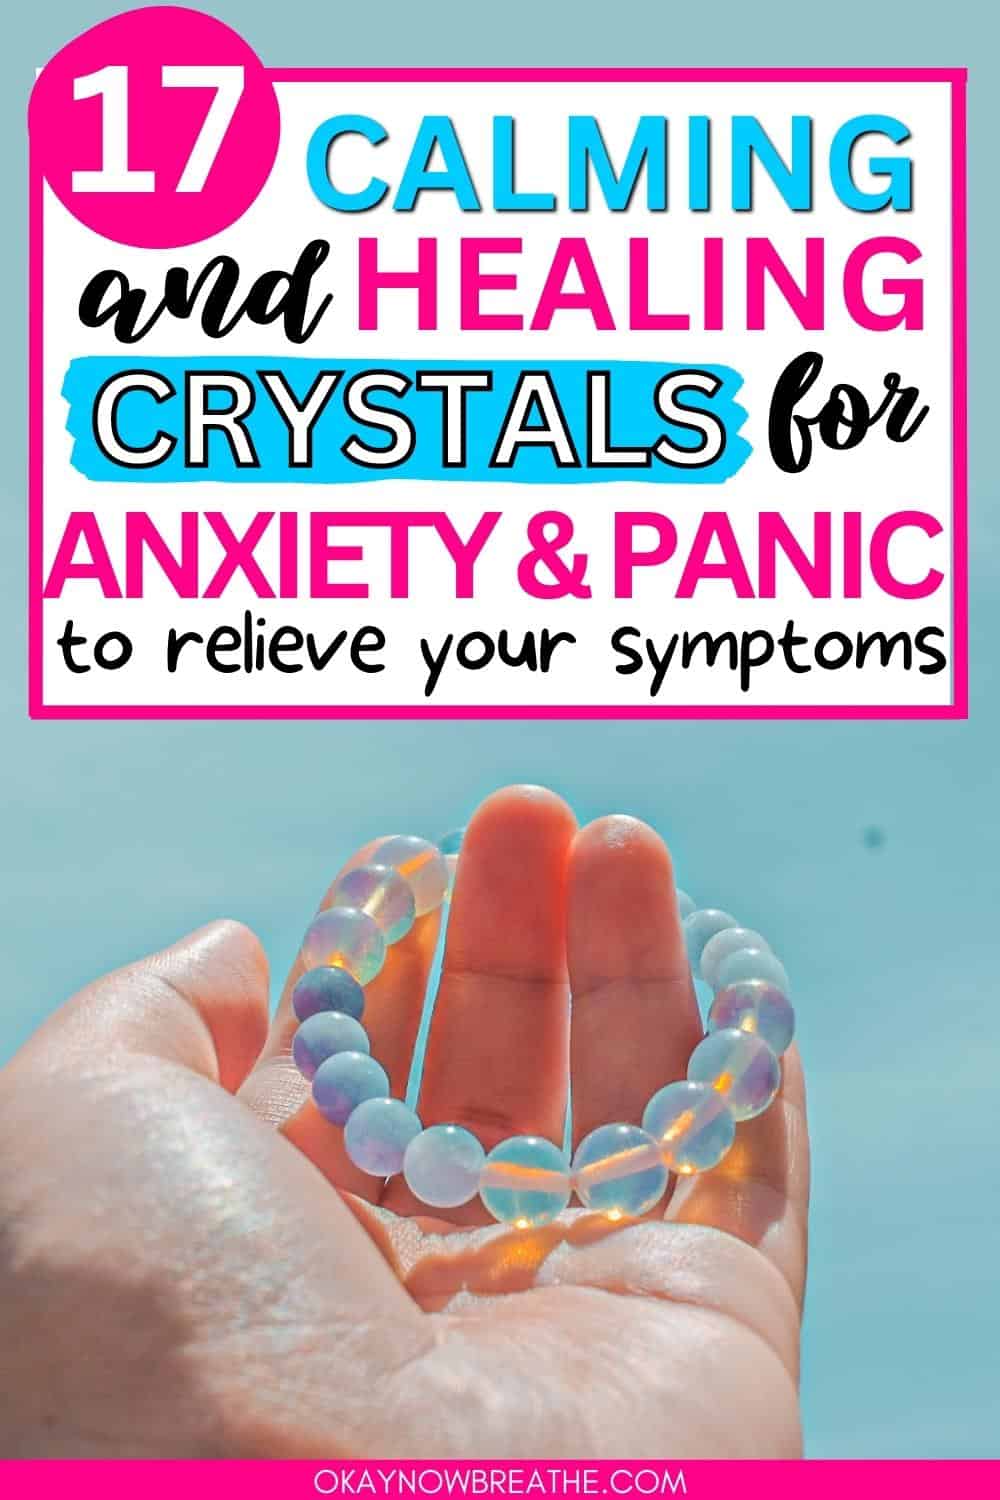 There is a hand holding an aquamarine crystal bracelet towards the sky. Above this, there is text that says 17 calming and healing crystals for anxiety and panic to relieve your symptoms.